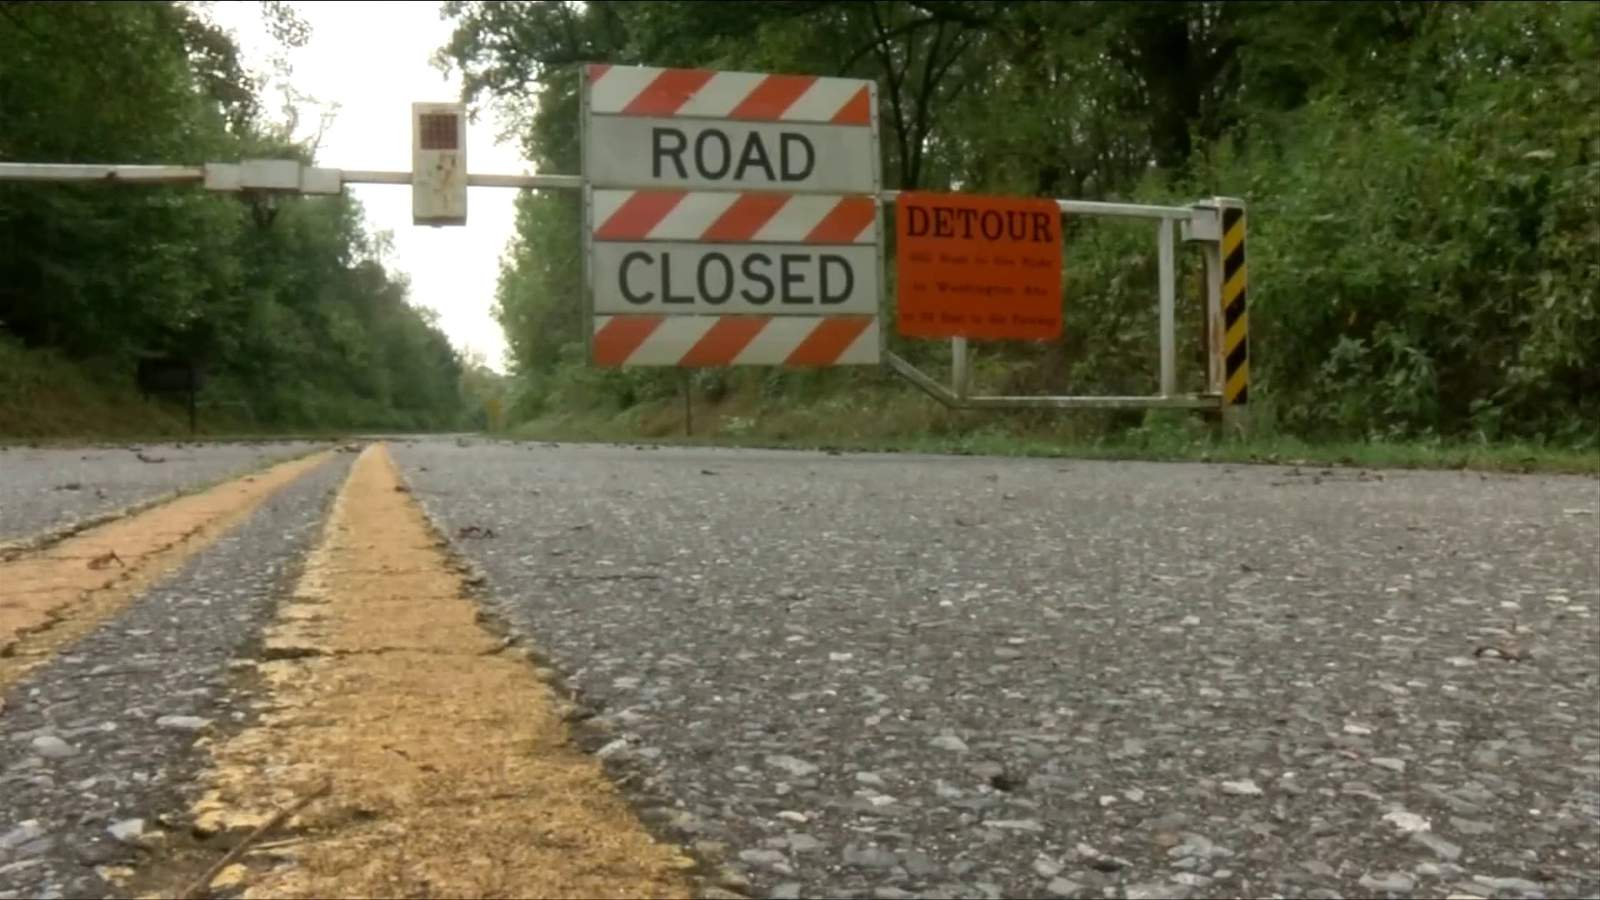 Roanoke tourism leaders say Blue Ridge Parkway closure may actually be blessing in disguise